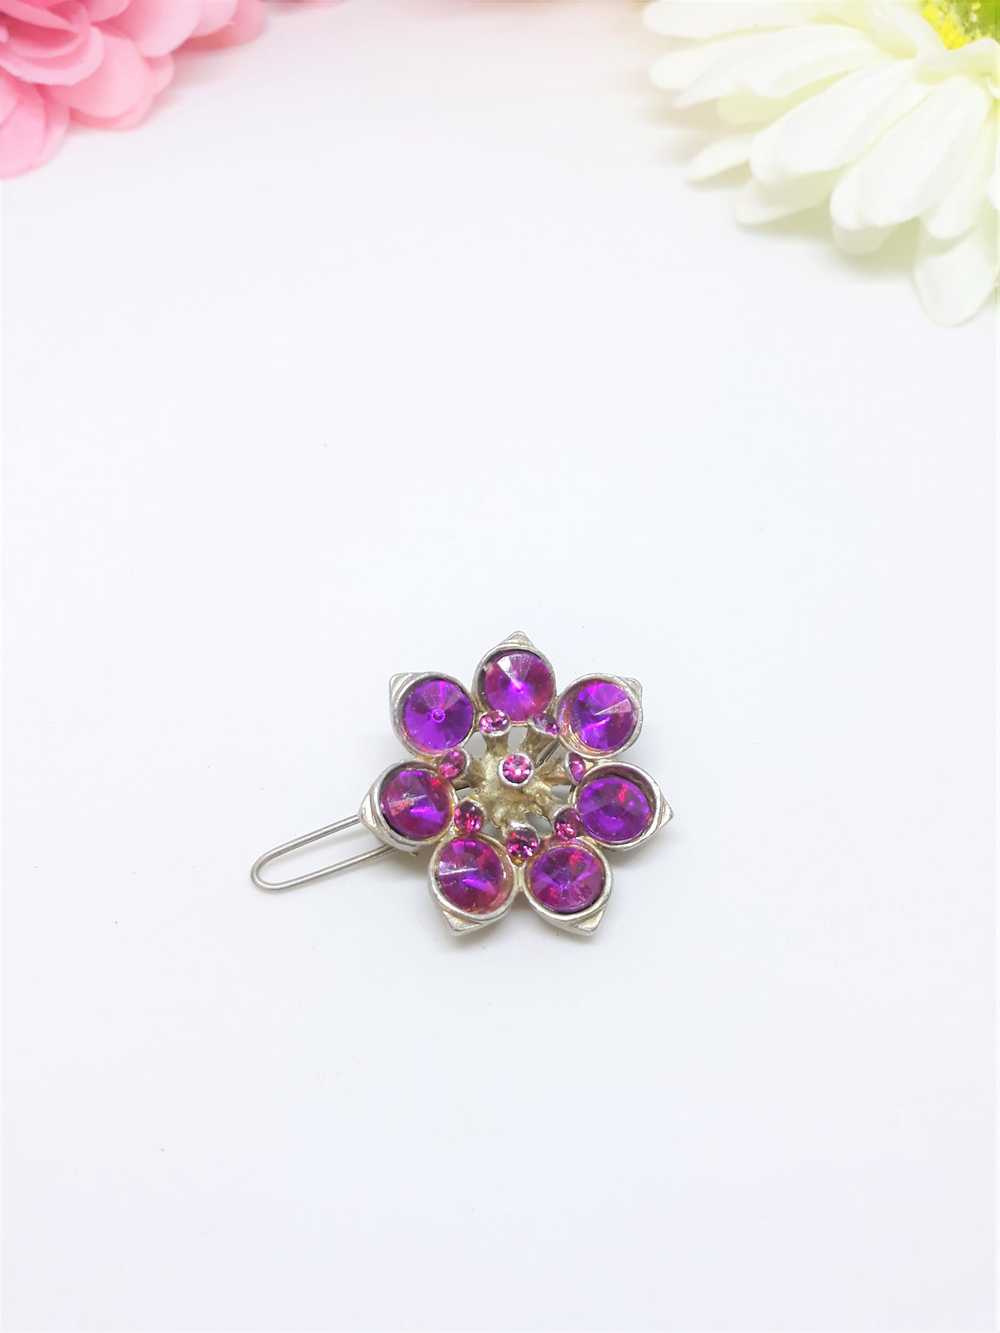 Gorgeous 1950s Purple Floral Hair Pin - image 4